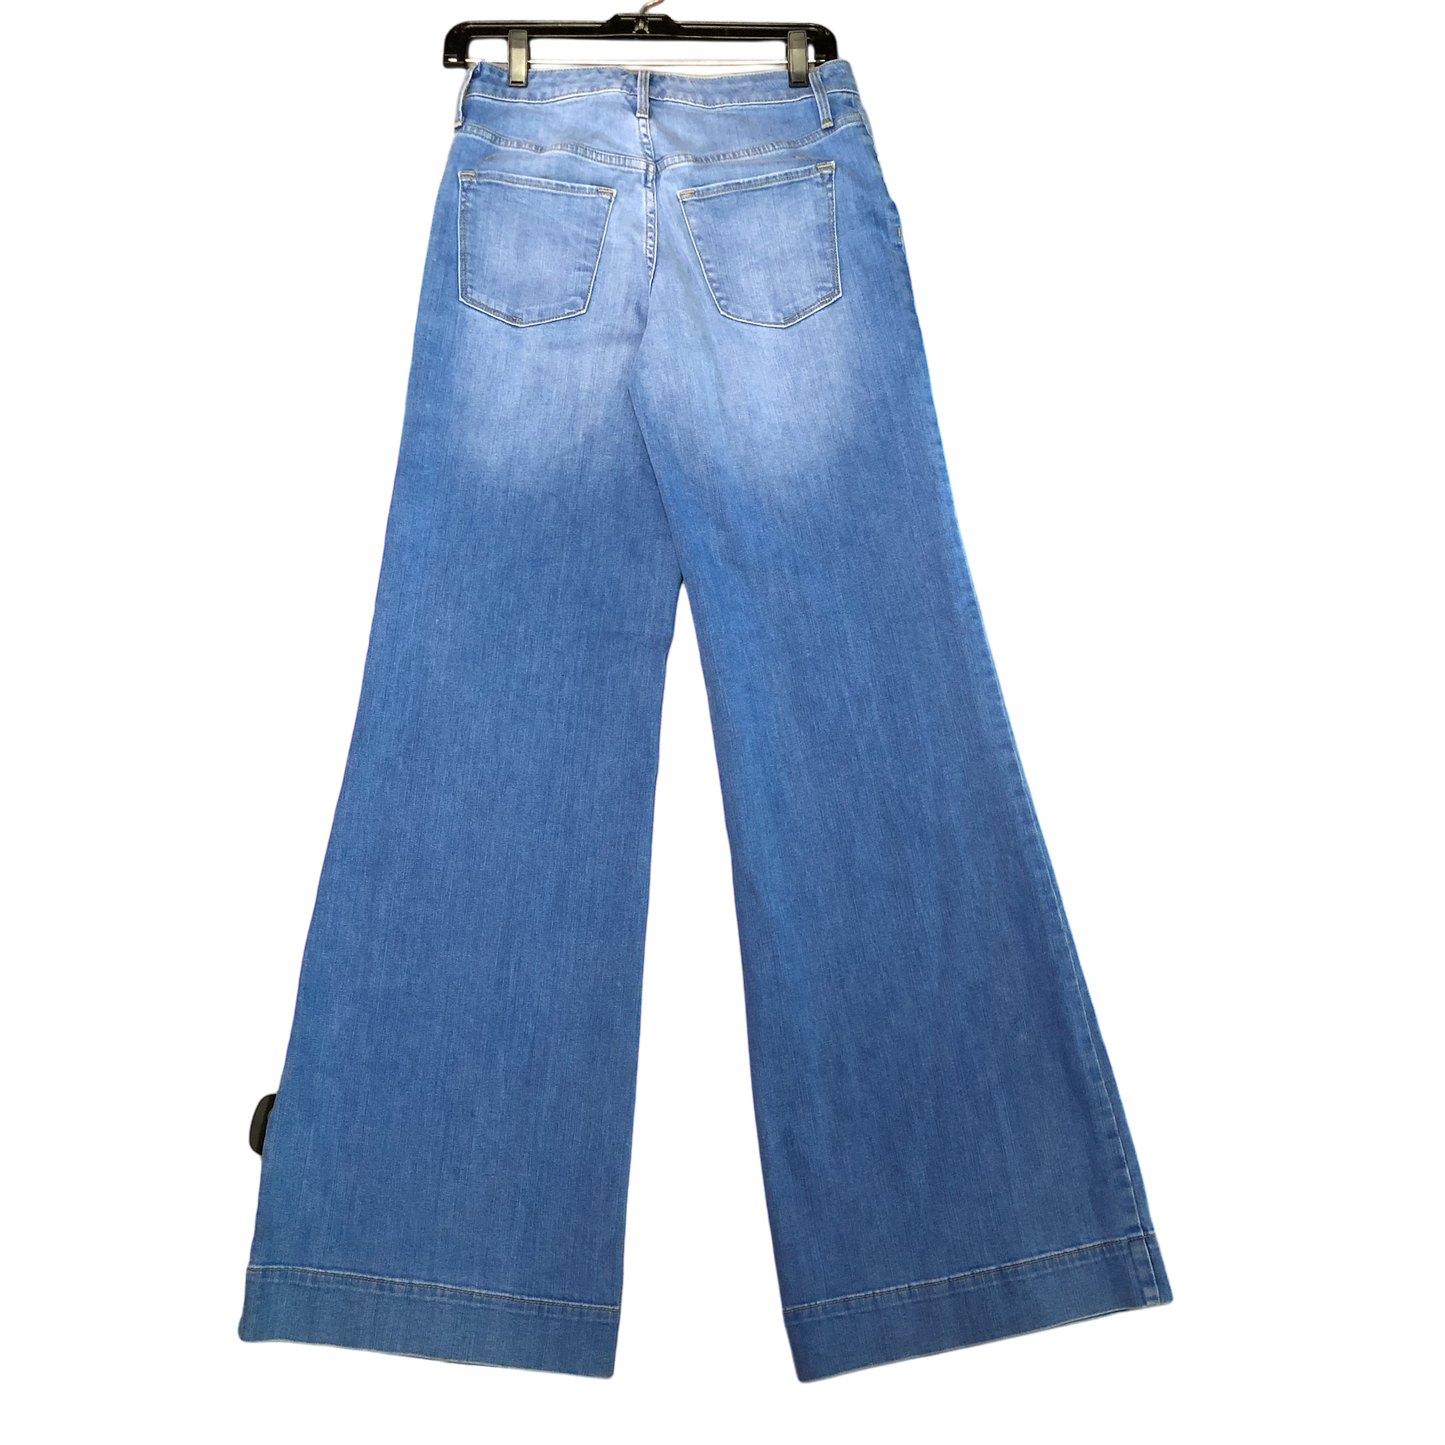 Jeans Flared By Mossimo  Size: 4